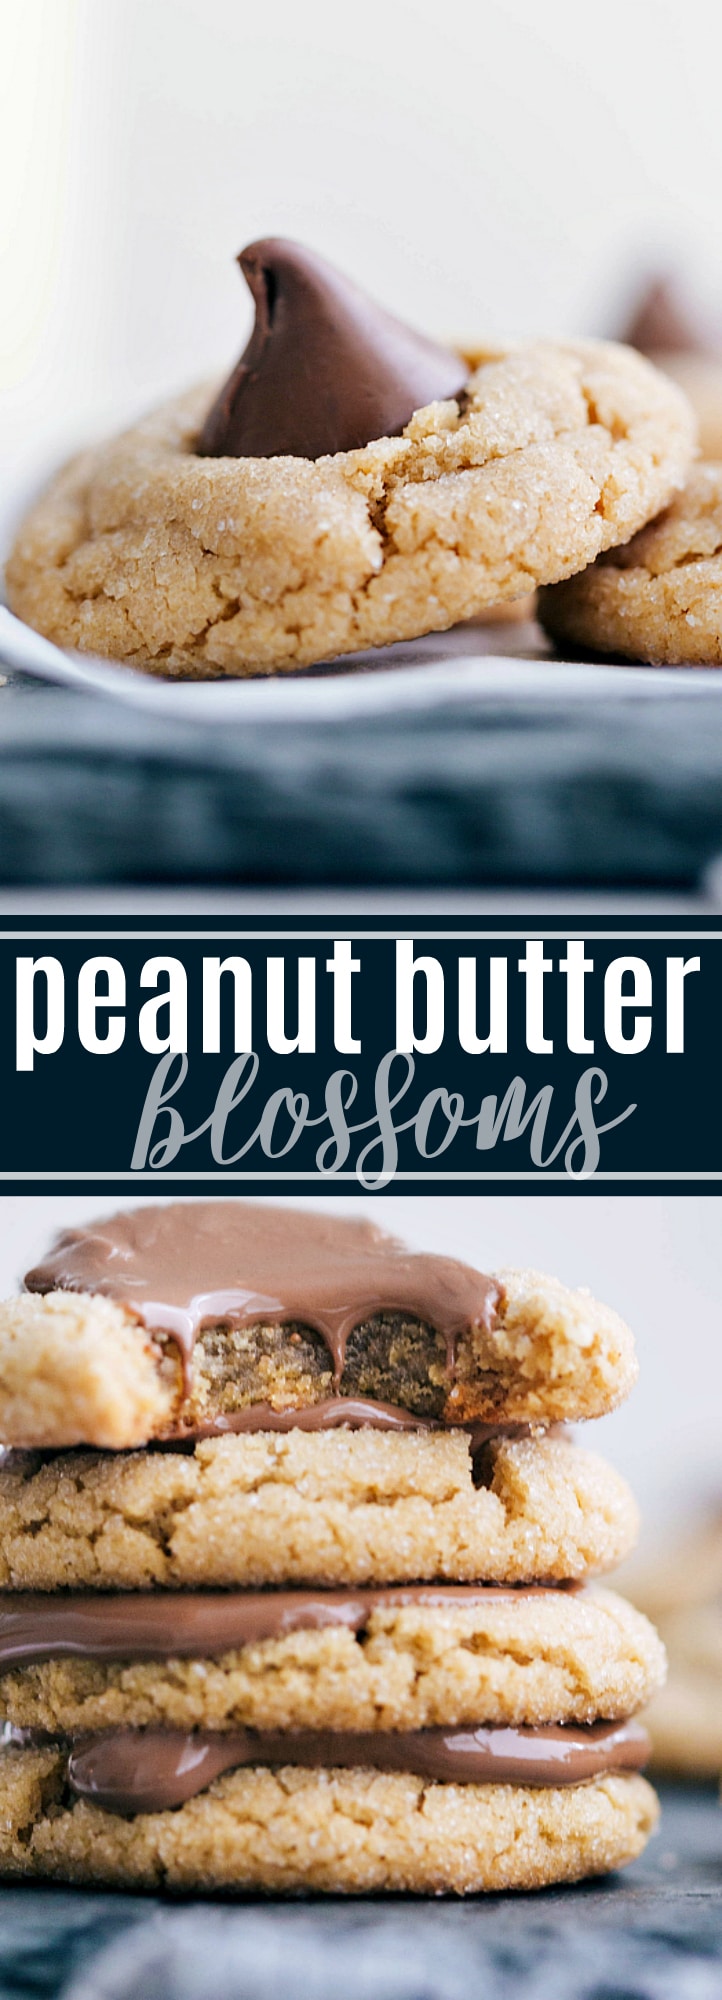 Peanut butter blossoms -- a chewy peanut butter base stuffed with a chocolate kiss. The secret to the best blossoms? Keeping the cookies small and rolling them in sugar before baking! via chelseasmessyapron.com #baking #bake #cookies #christmas #dessert #easy #quick #blossom #blossoms #peanut #butter #chocolate